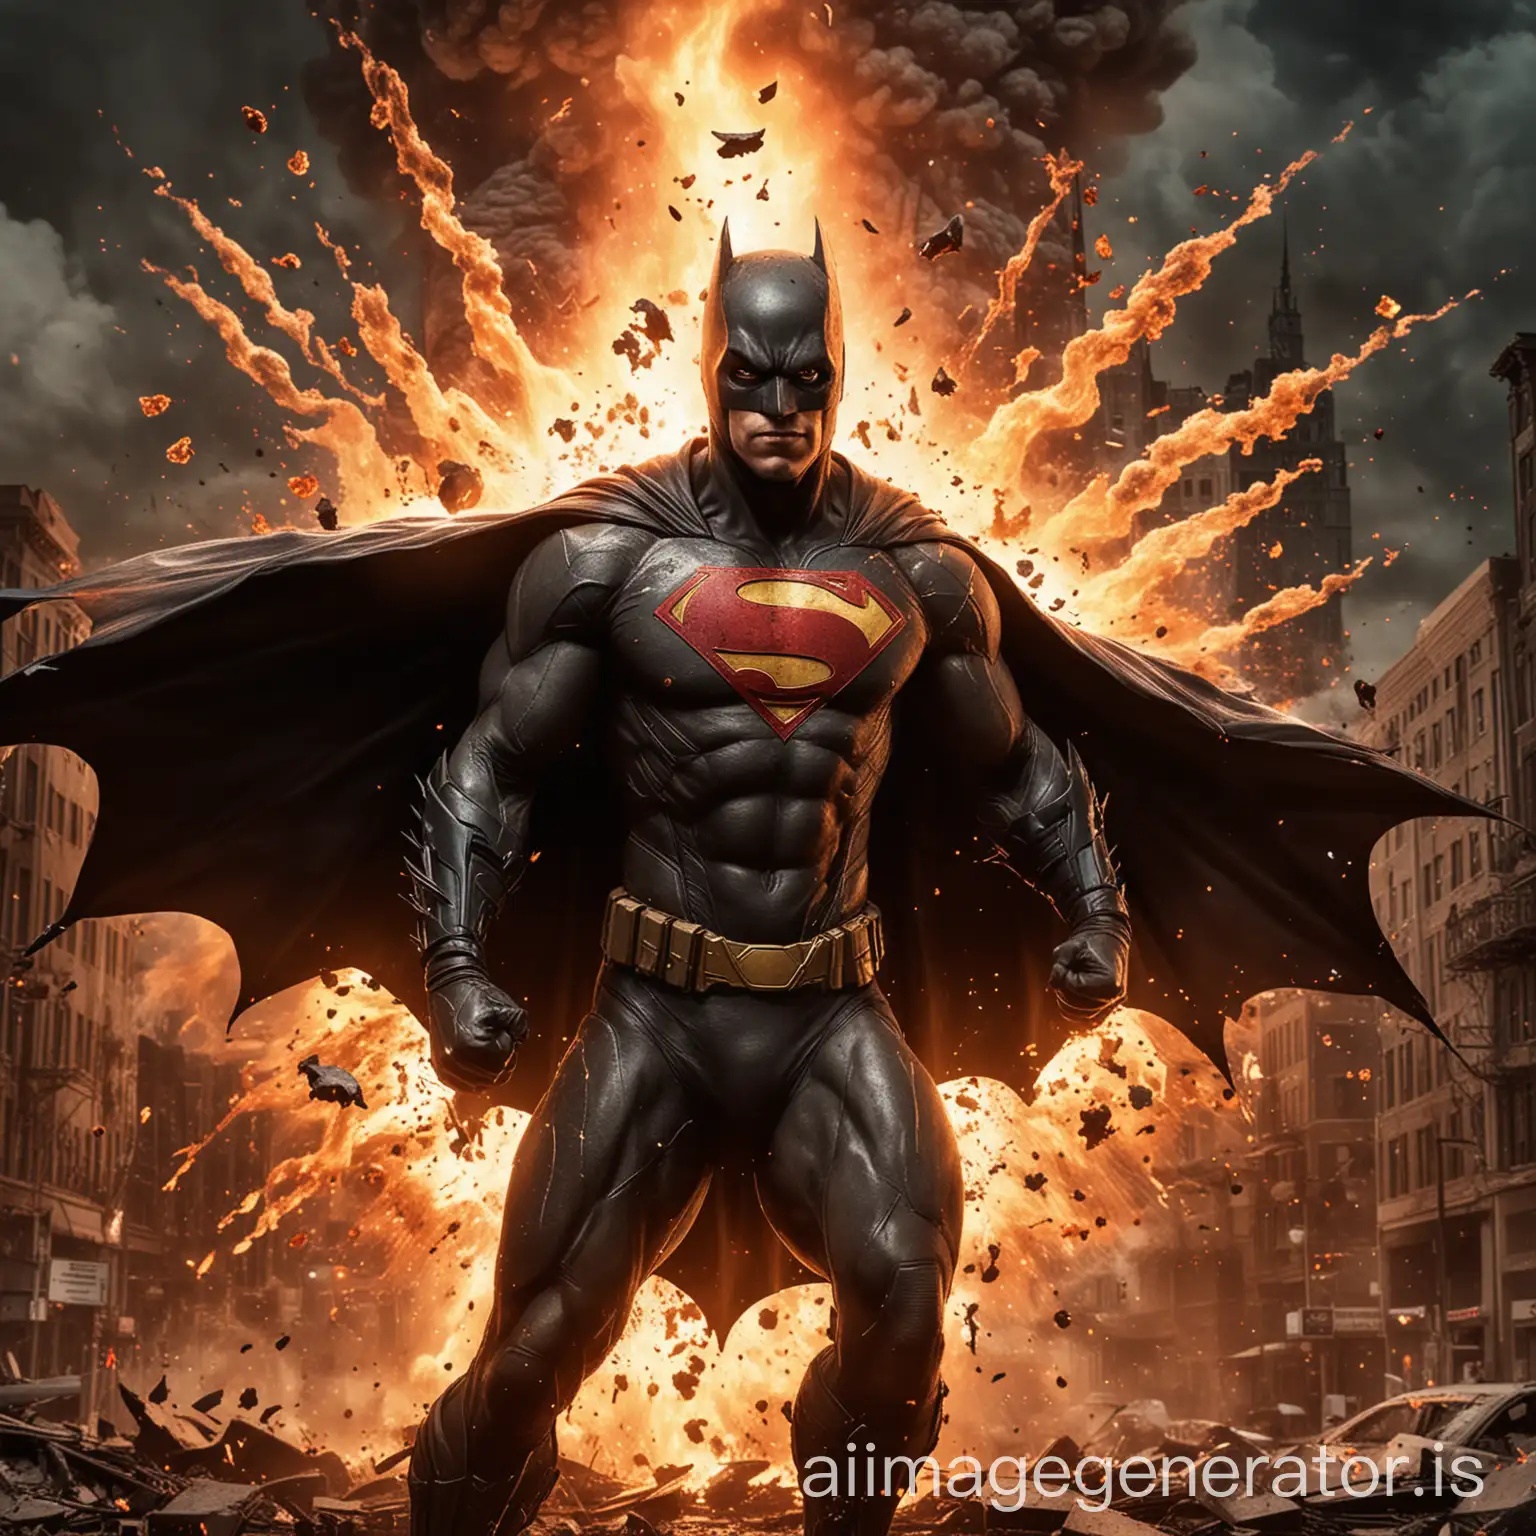 bat man combined with super man  fire an explosions in the background